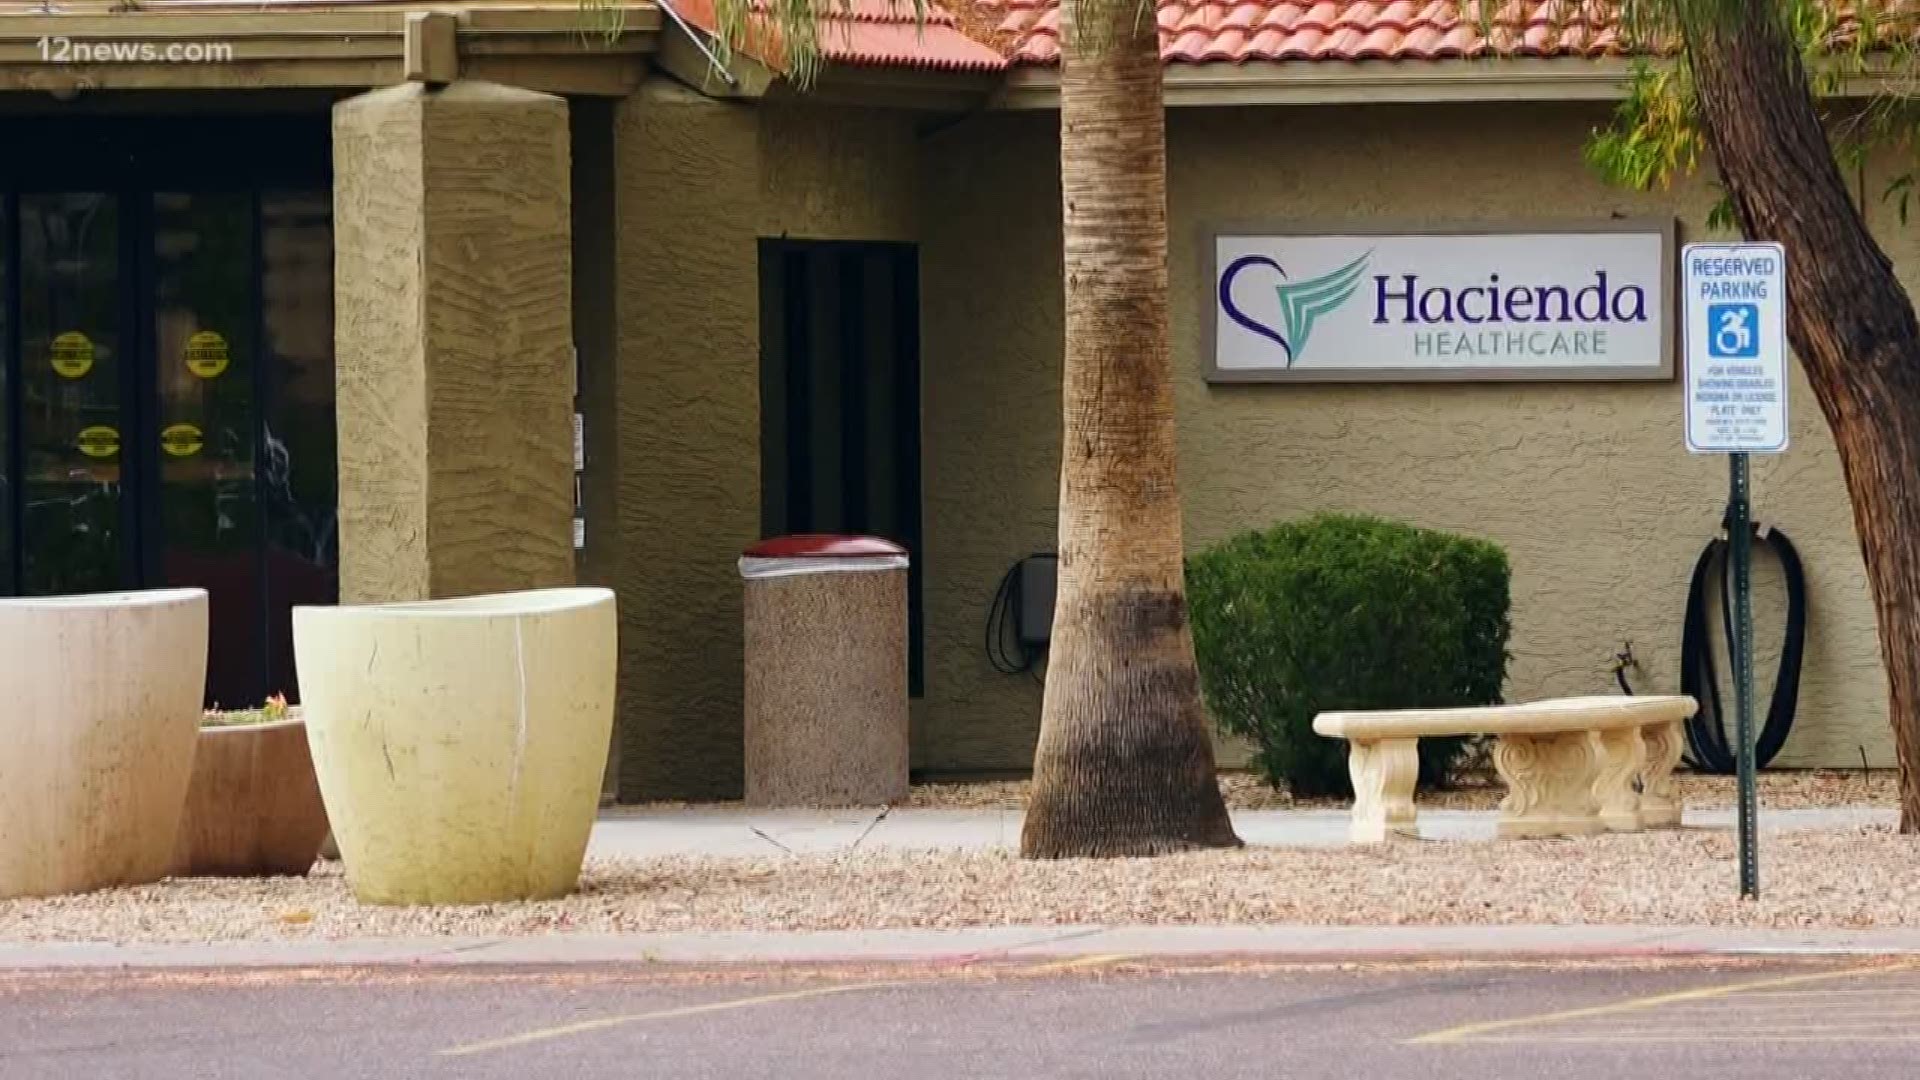 Last week the state of Arizona announced it is issuing a notice of intent to revoke the license for Hacienda Healthcare's Phoenix facility. This comes after maggots were discovered under a patient's bandages. The governor expressed concern about the patients at the facility that came under fire last year after an incapacitated patient was raped and gave birth to a baby boy.